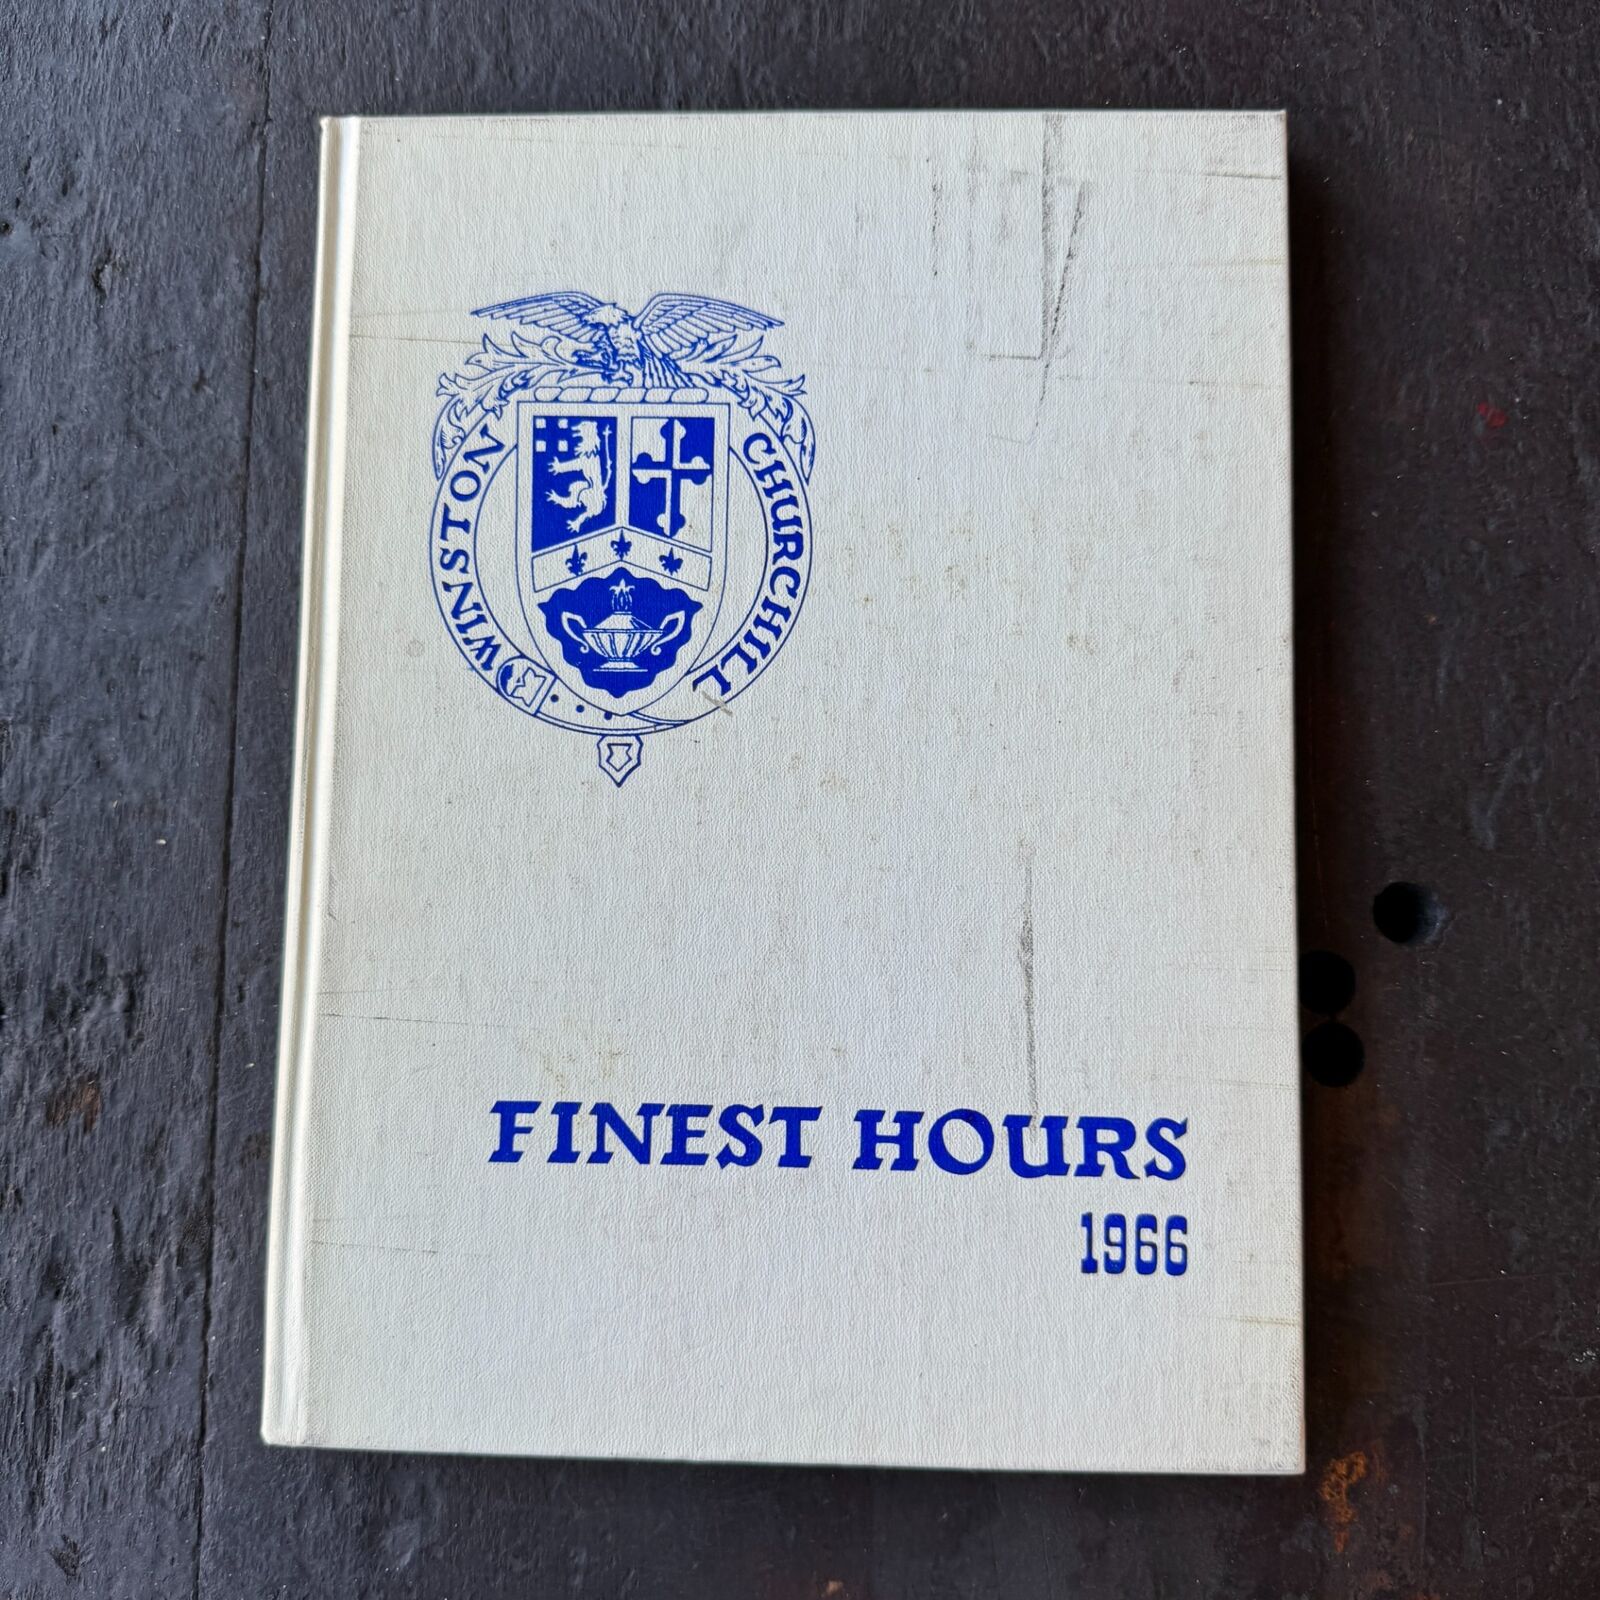 WINSTON CHURCHILL HIGH SCHOOL Yearbook 1966 Potomac MD - FINEST HOURS